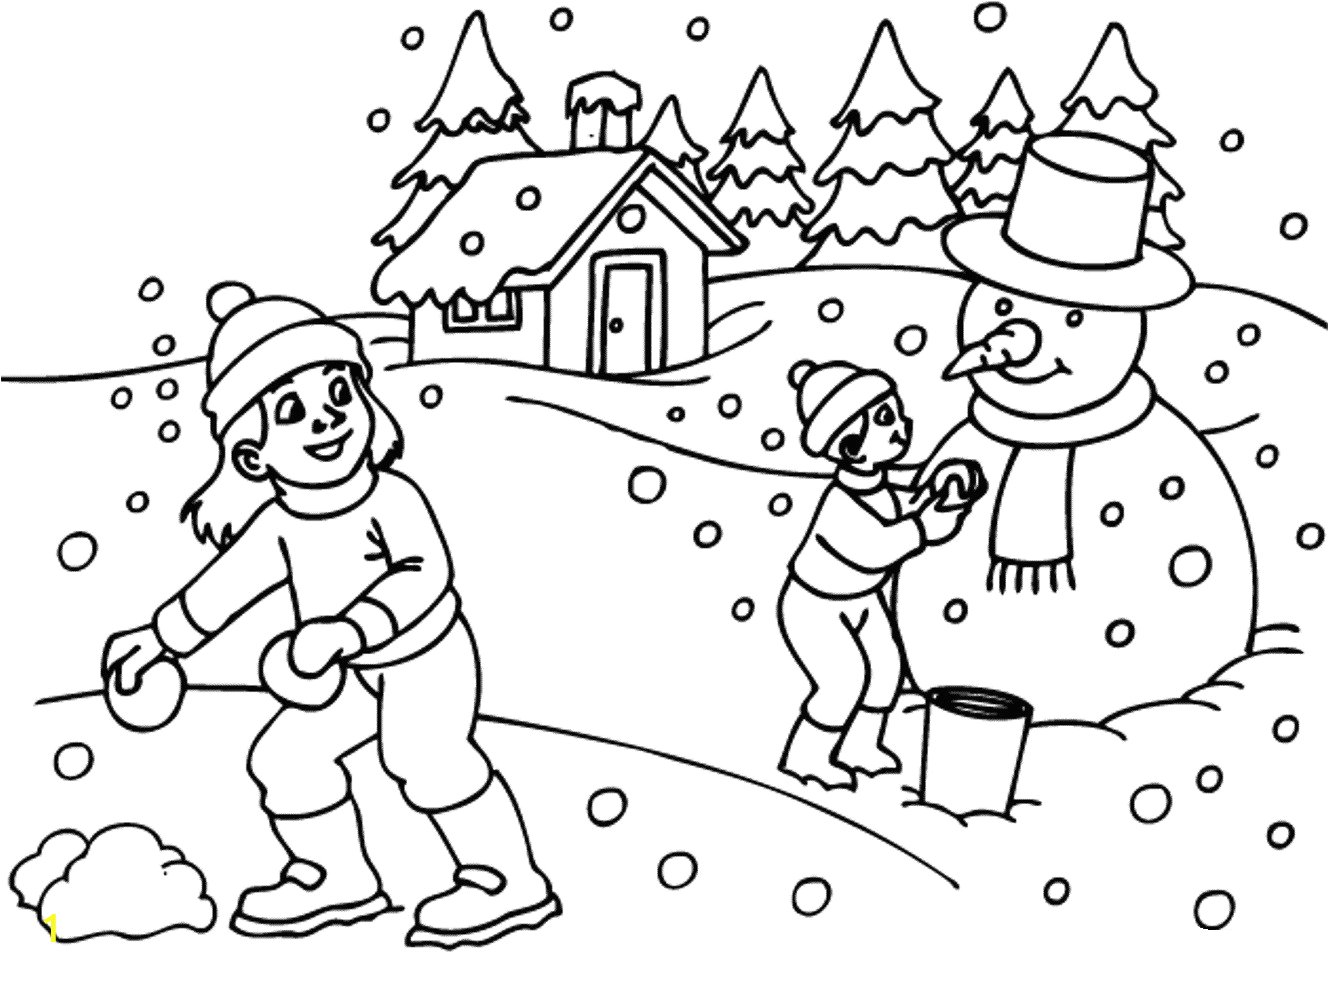 Spectacular winter coloring book for children